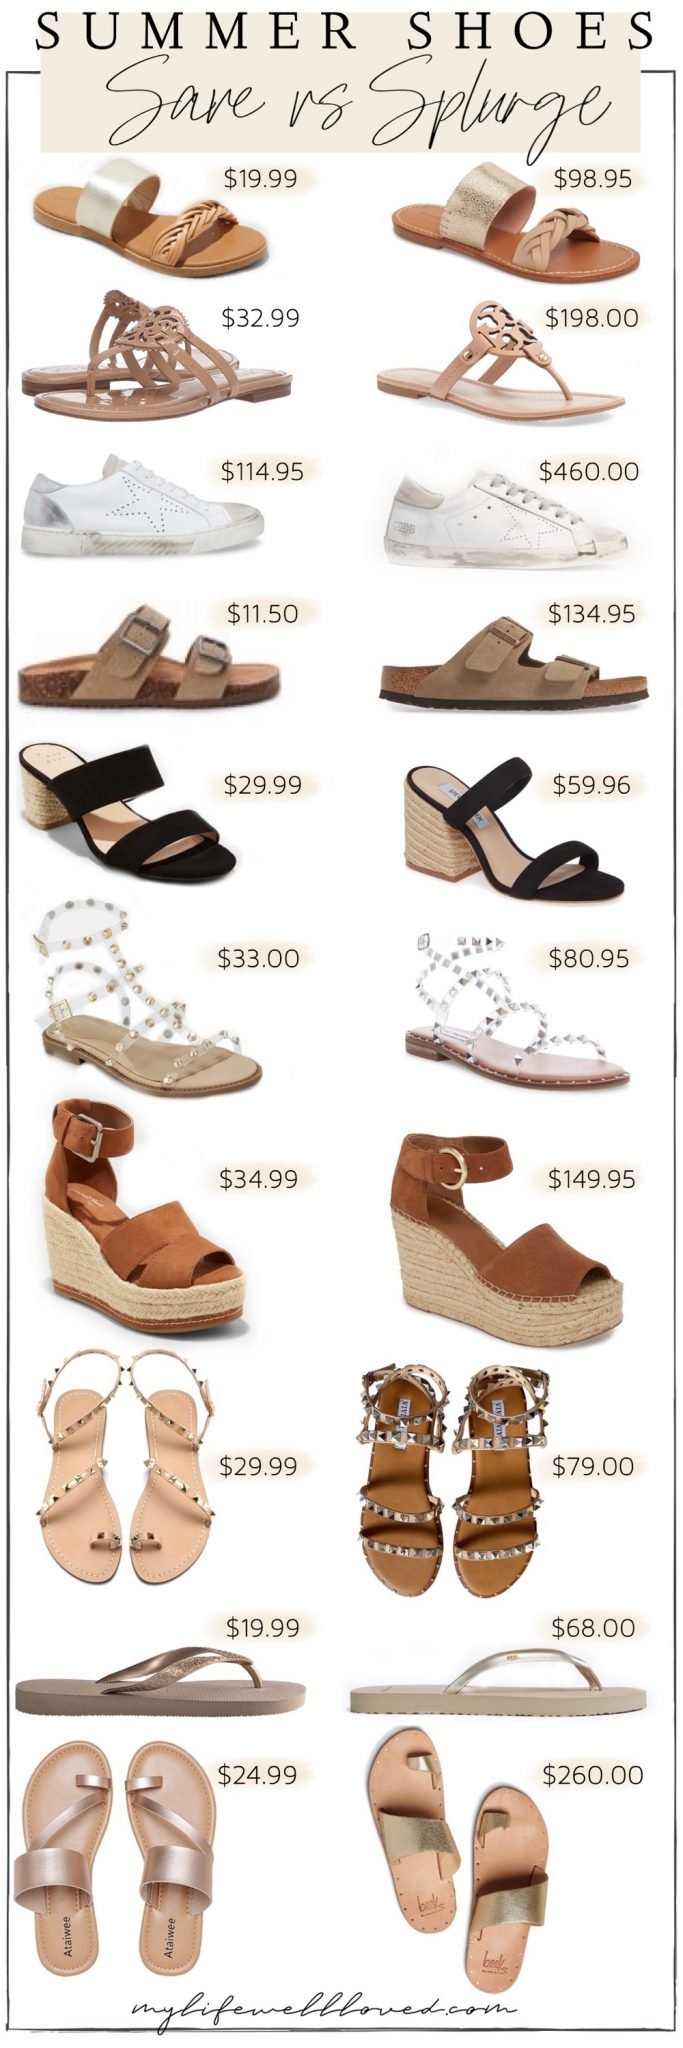 Best Shoe Dupes by Alabama Life + Style blogger, Heather Brown // My Life Well Loved